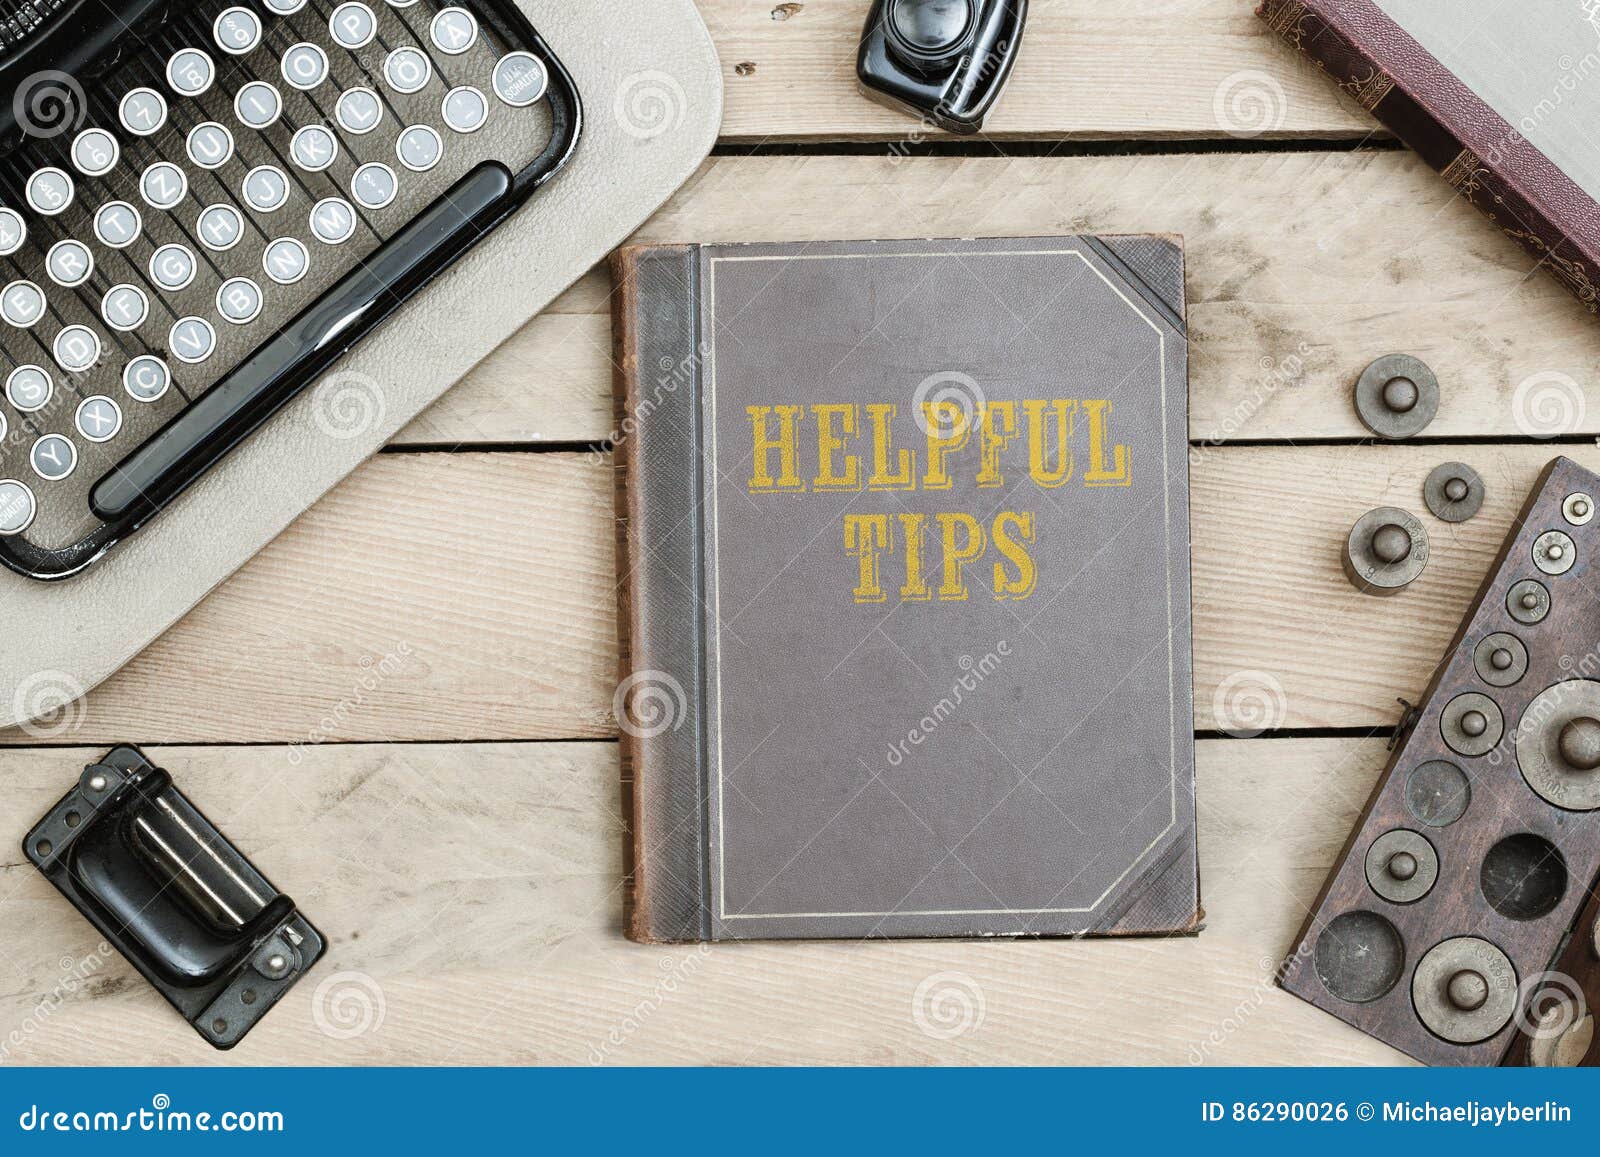 Helpful Tips On Old Book Cover At Office Desk With Vintage Items